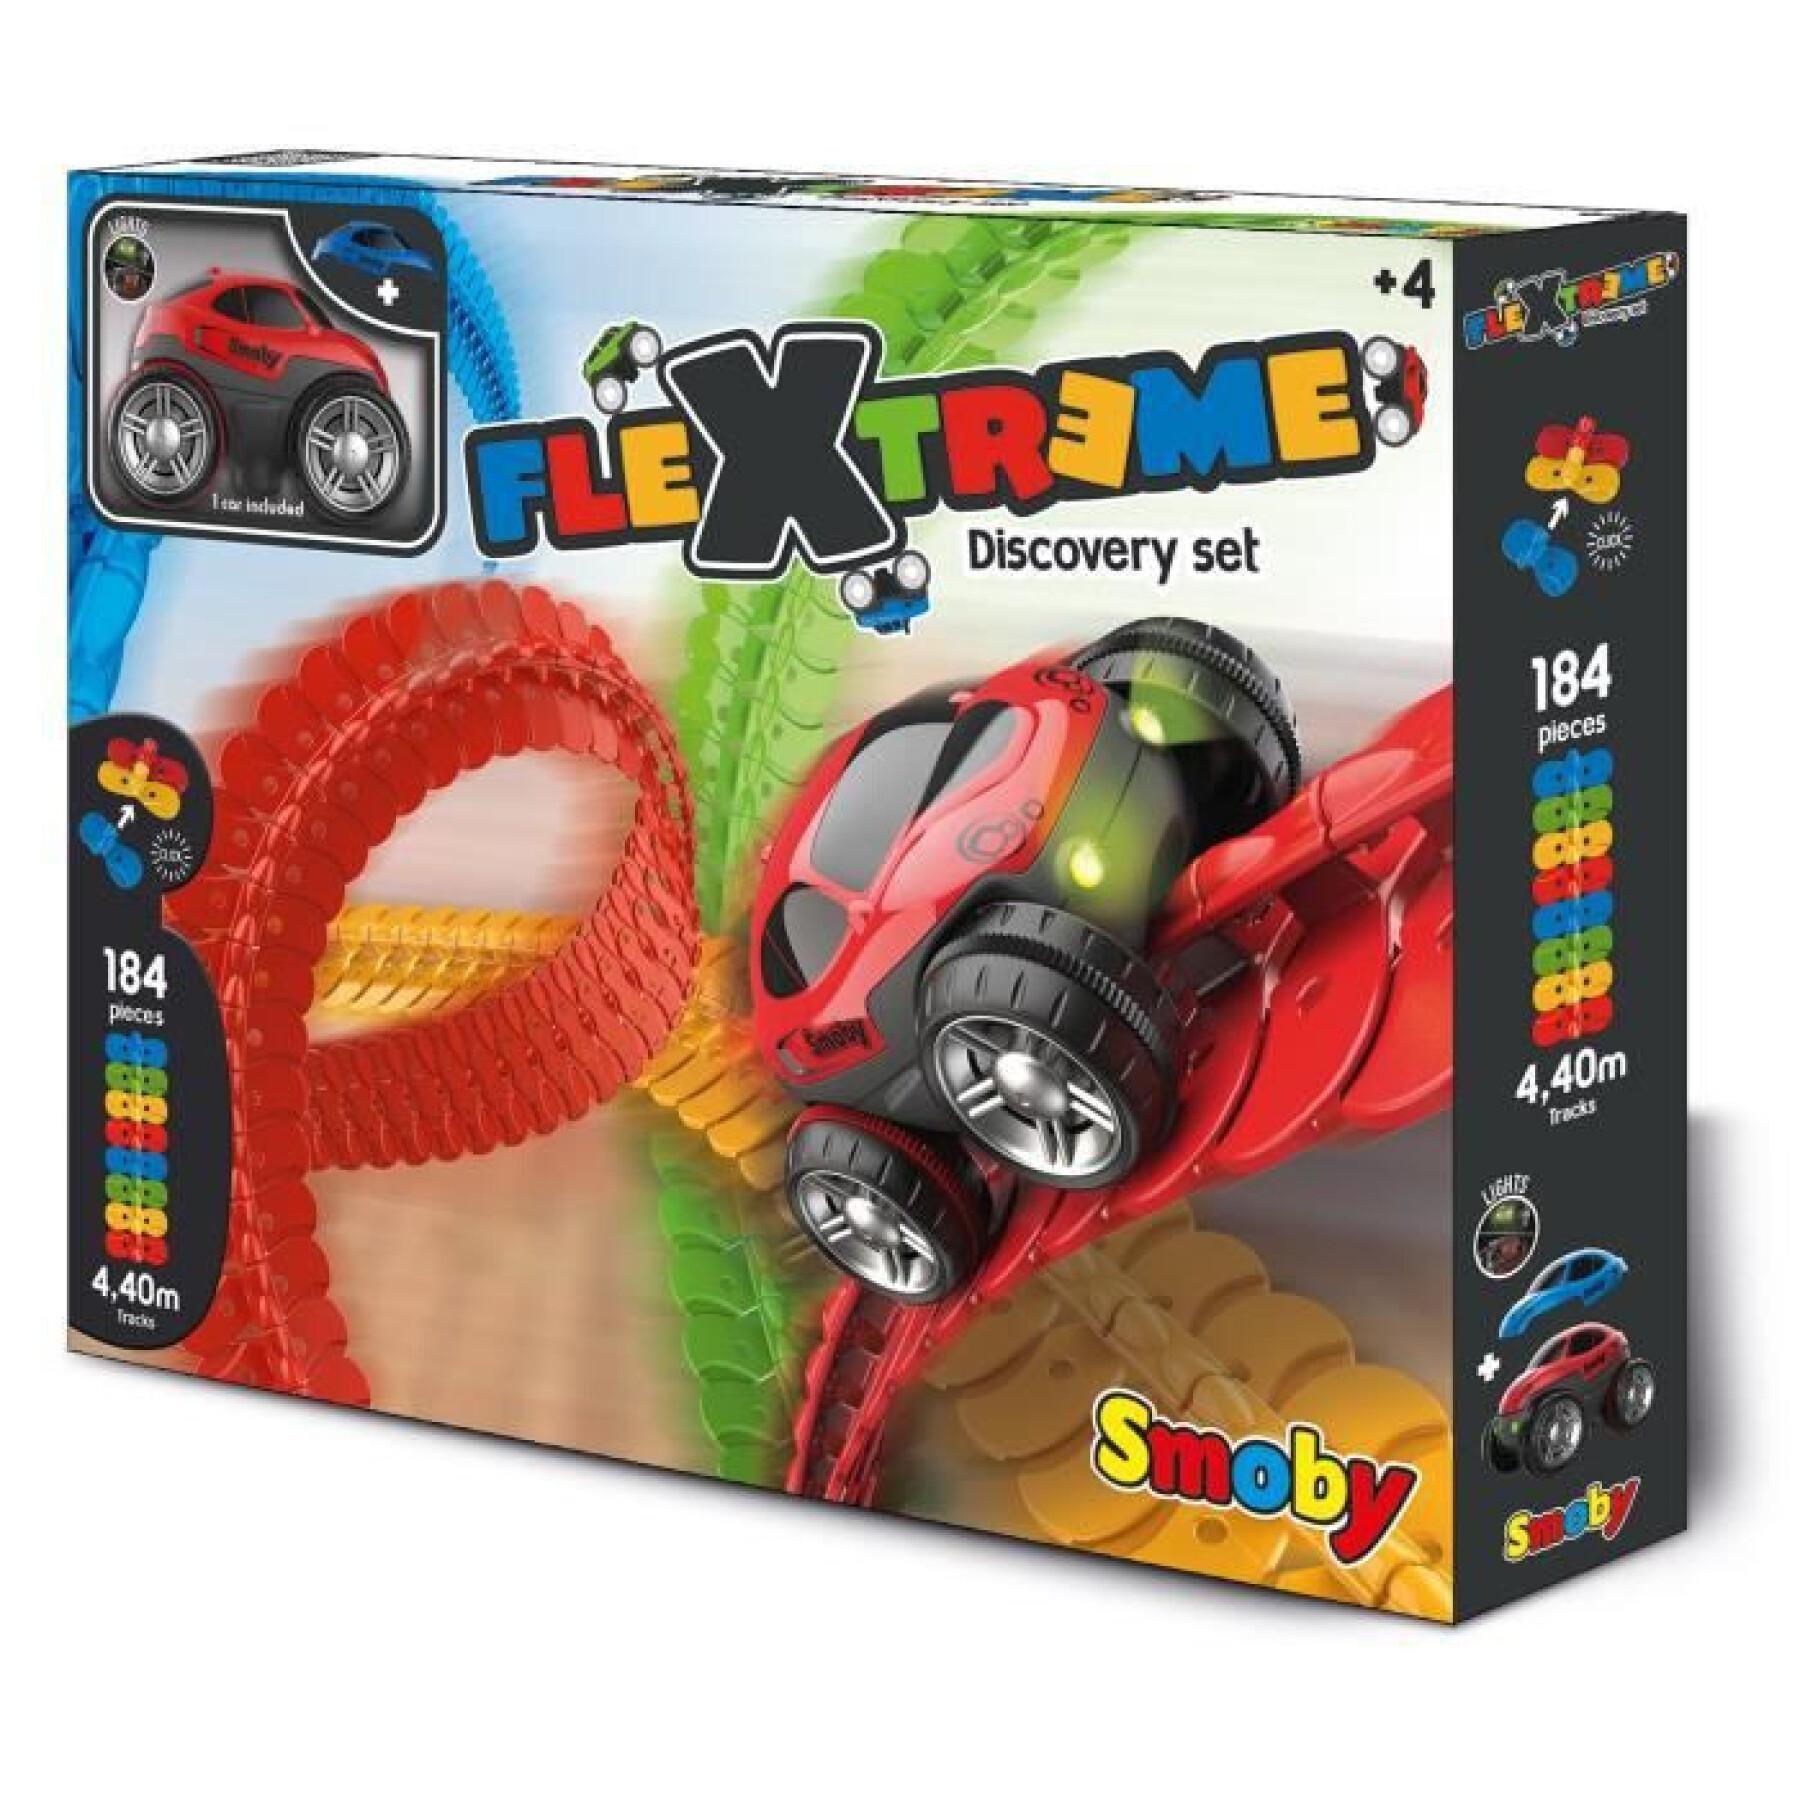 Flextreme Discovery Car Game Lot Smoby